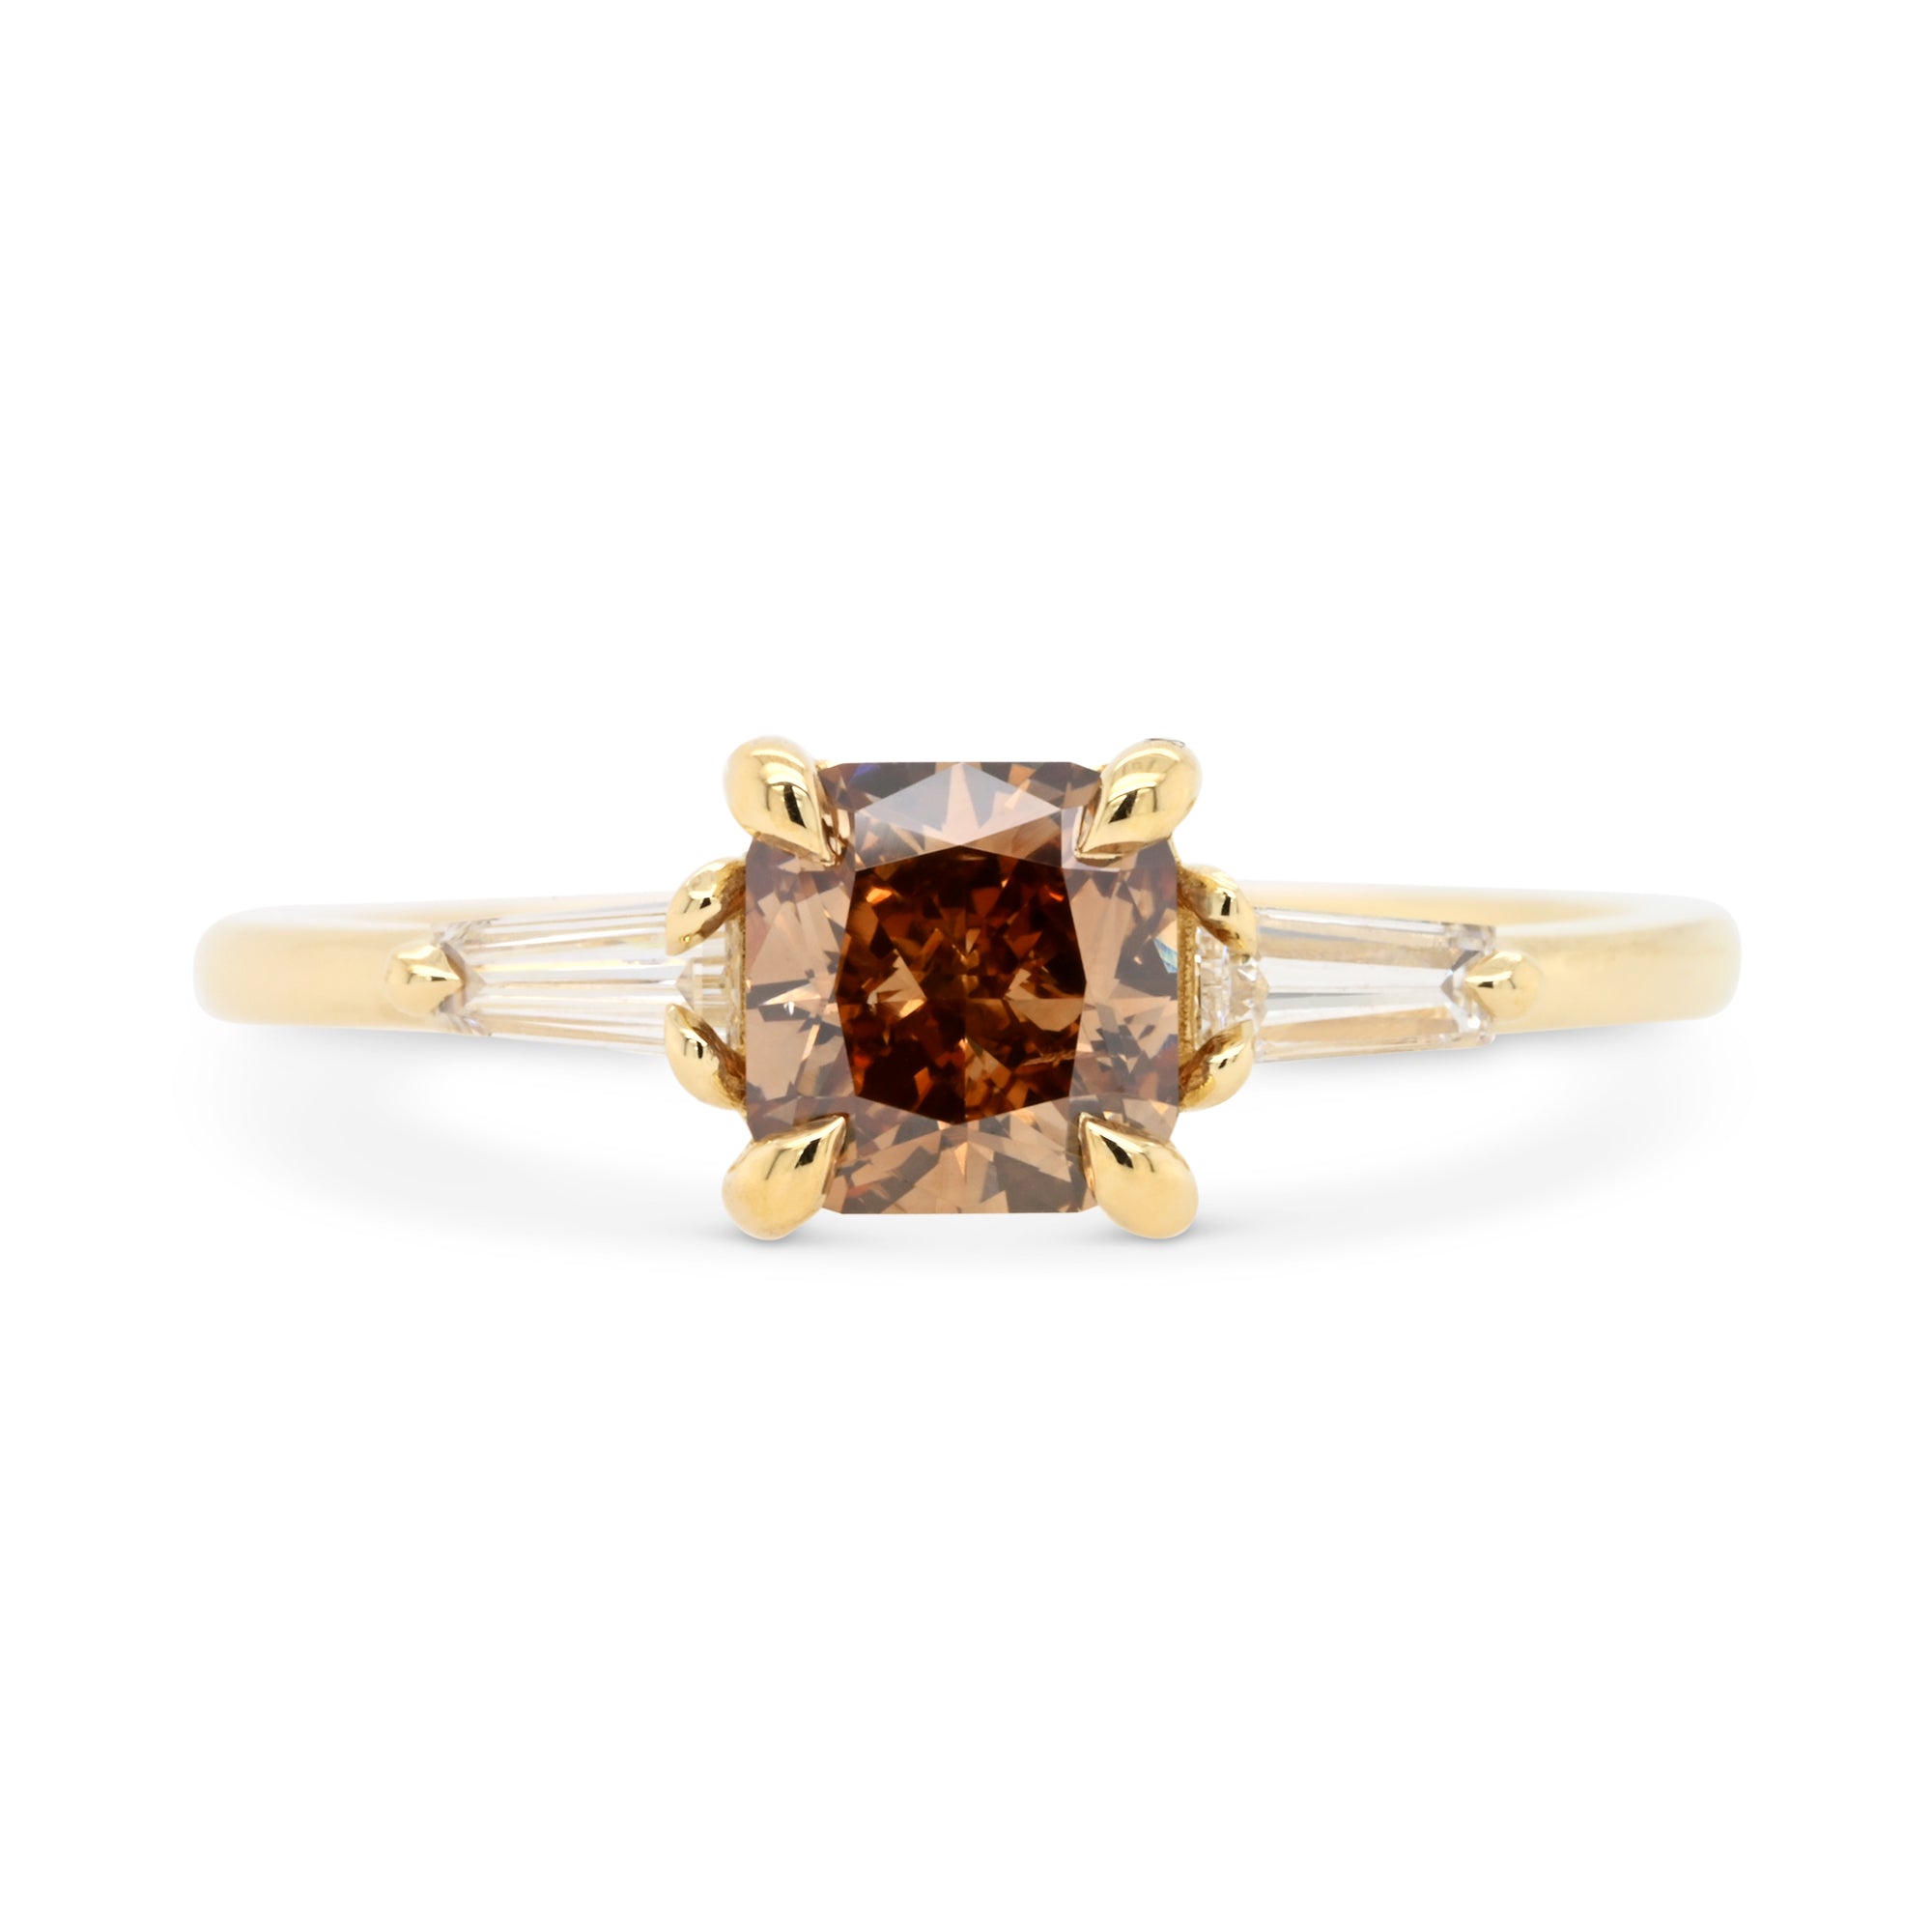 14k yellow gold engagement ring with a fancy brown cushion diamond and tapered baguette diamond accents